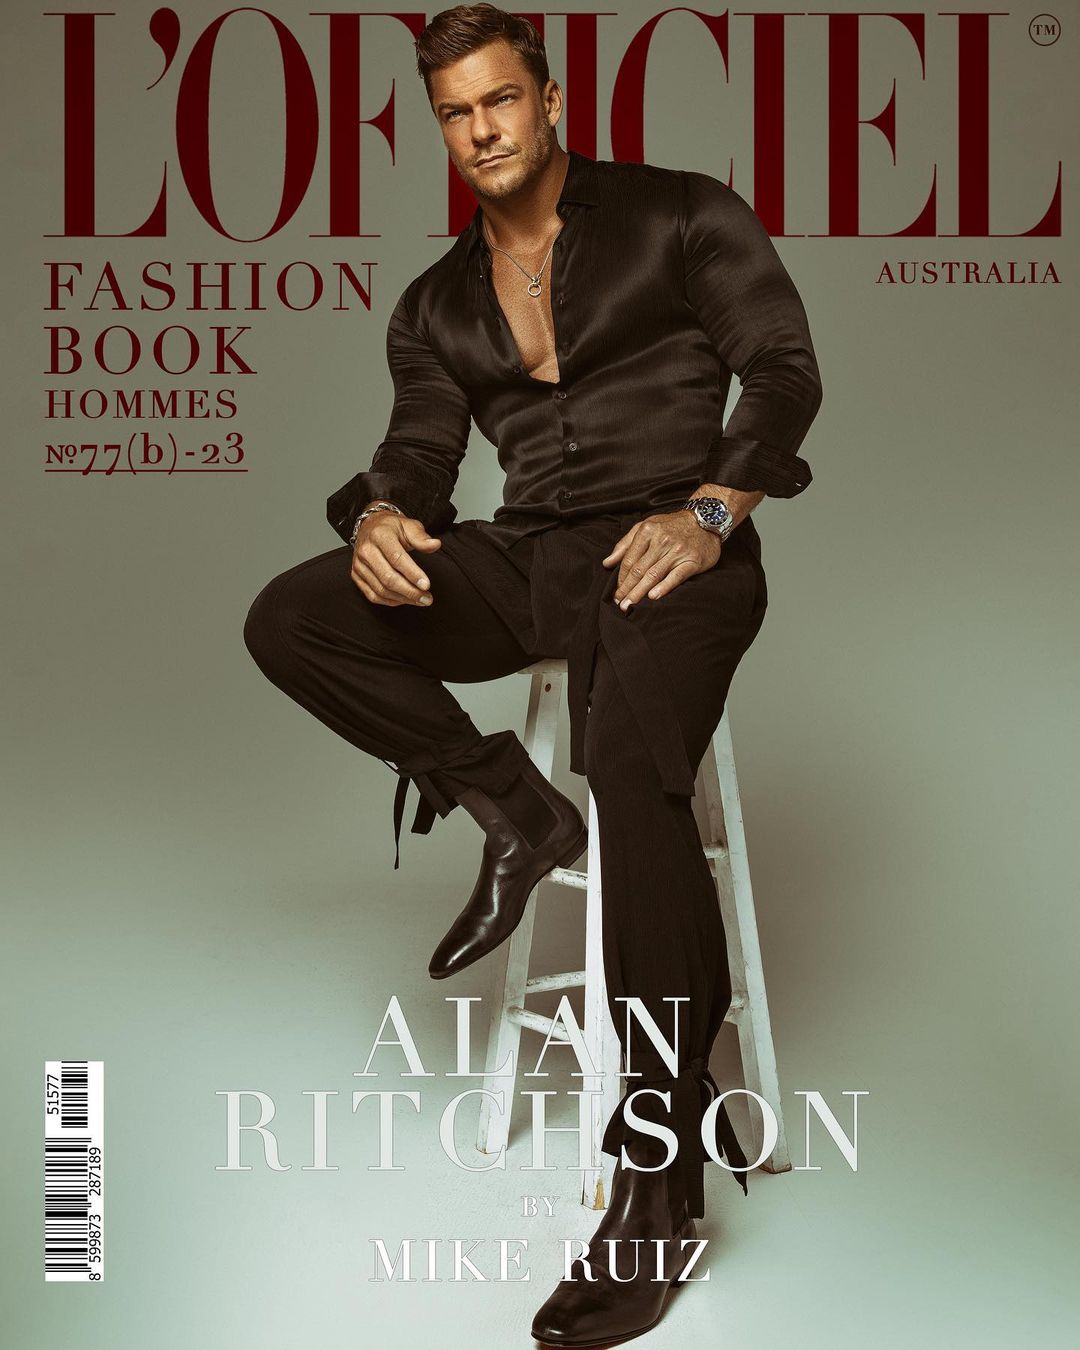 Alan Ritchson on the cover of  L’OFFICIEL FASHION BOOK AUSTRALIA